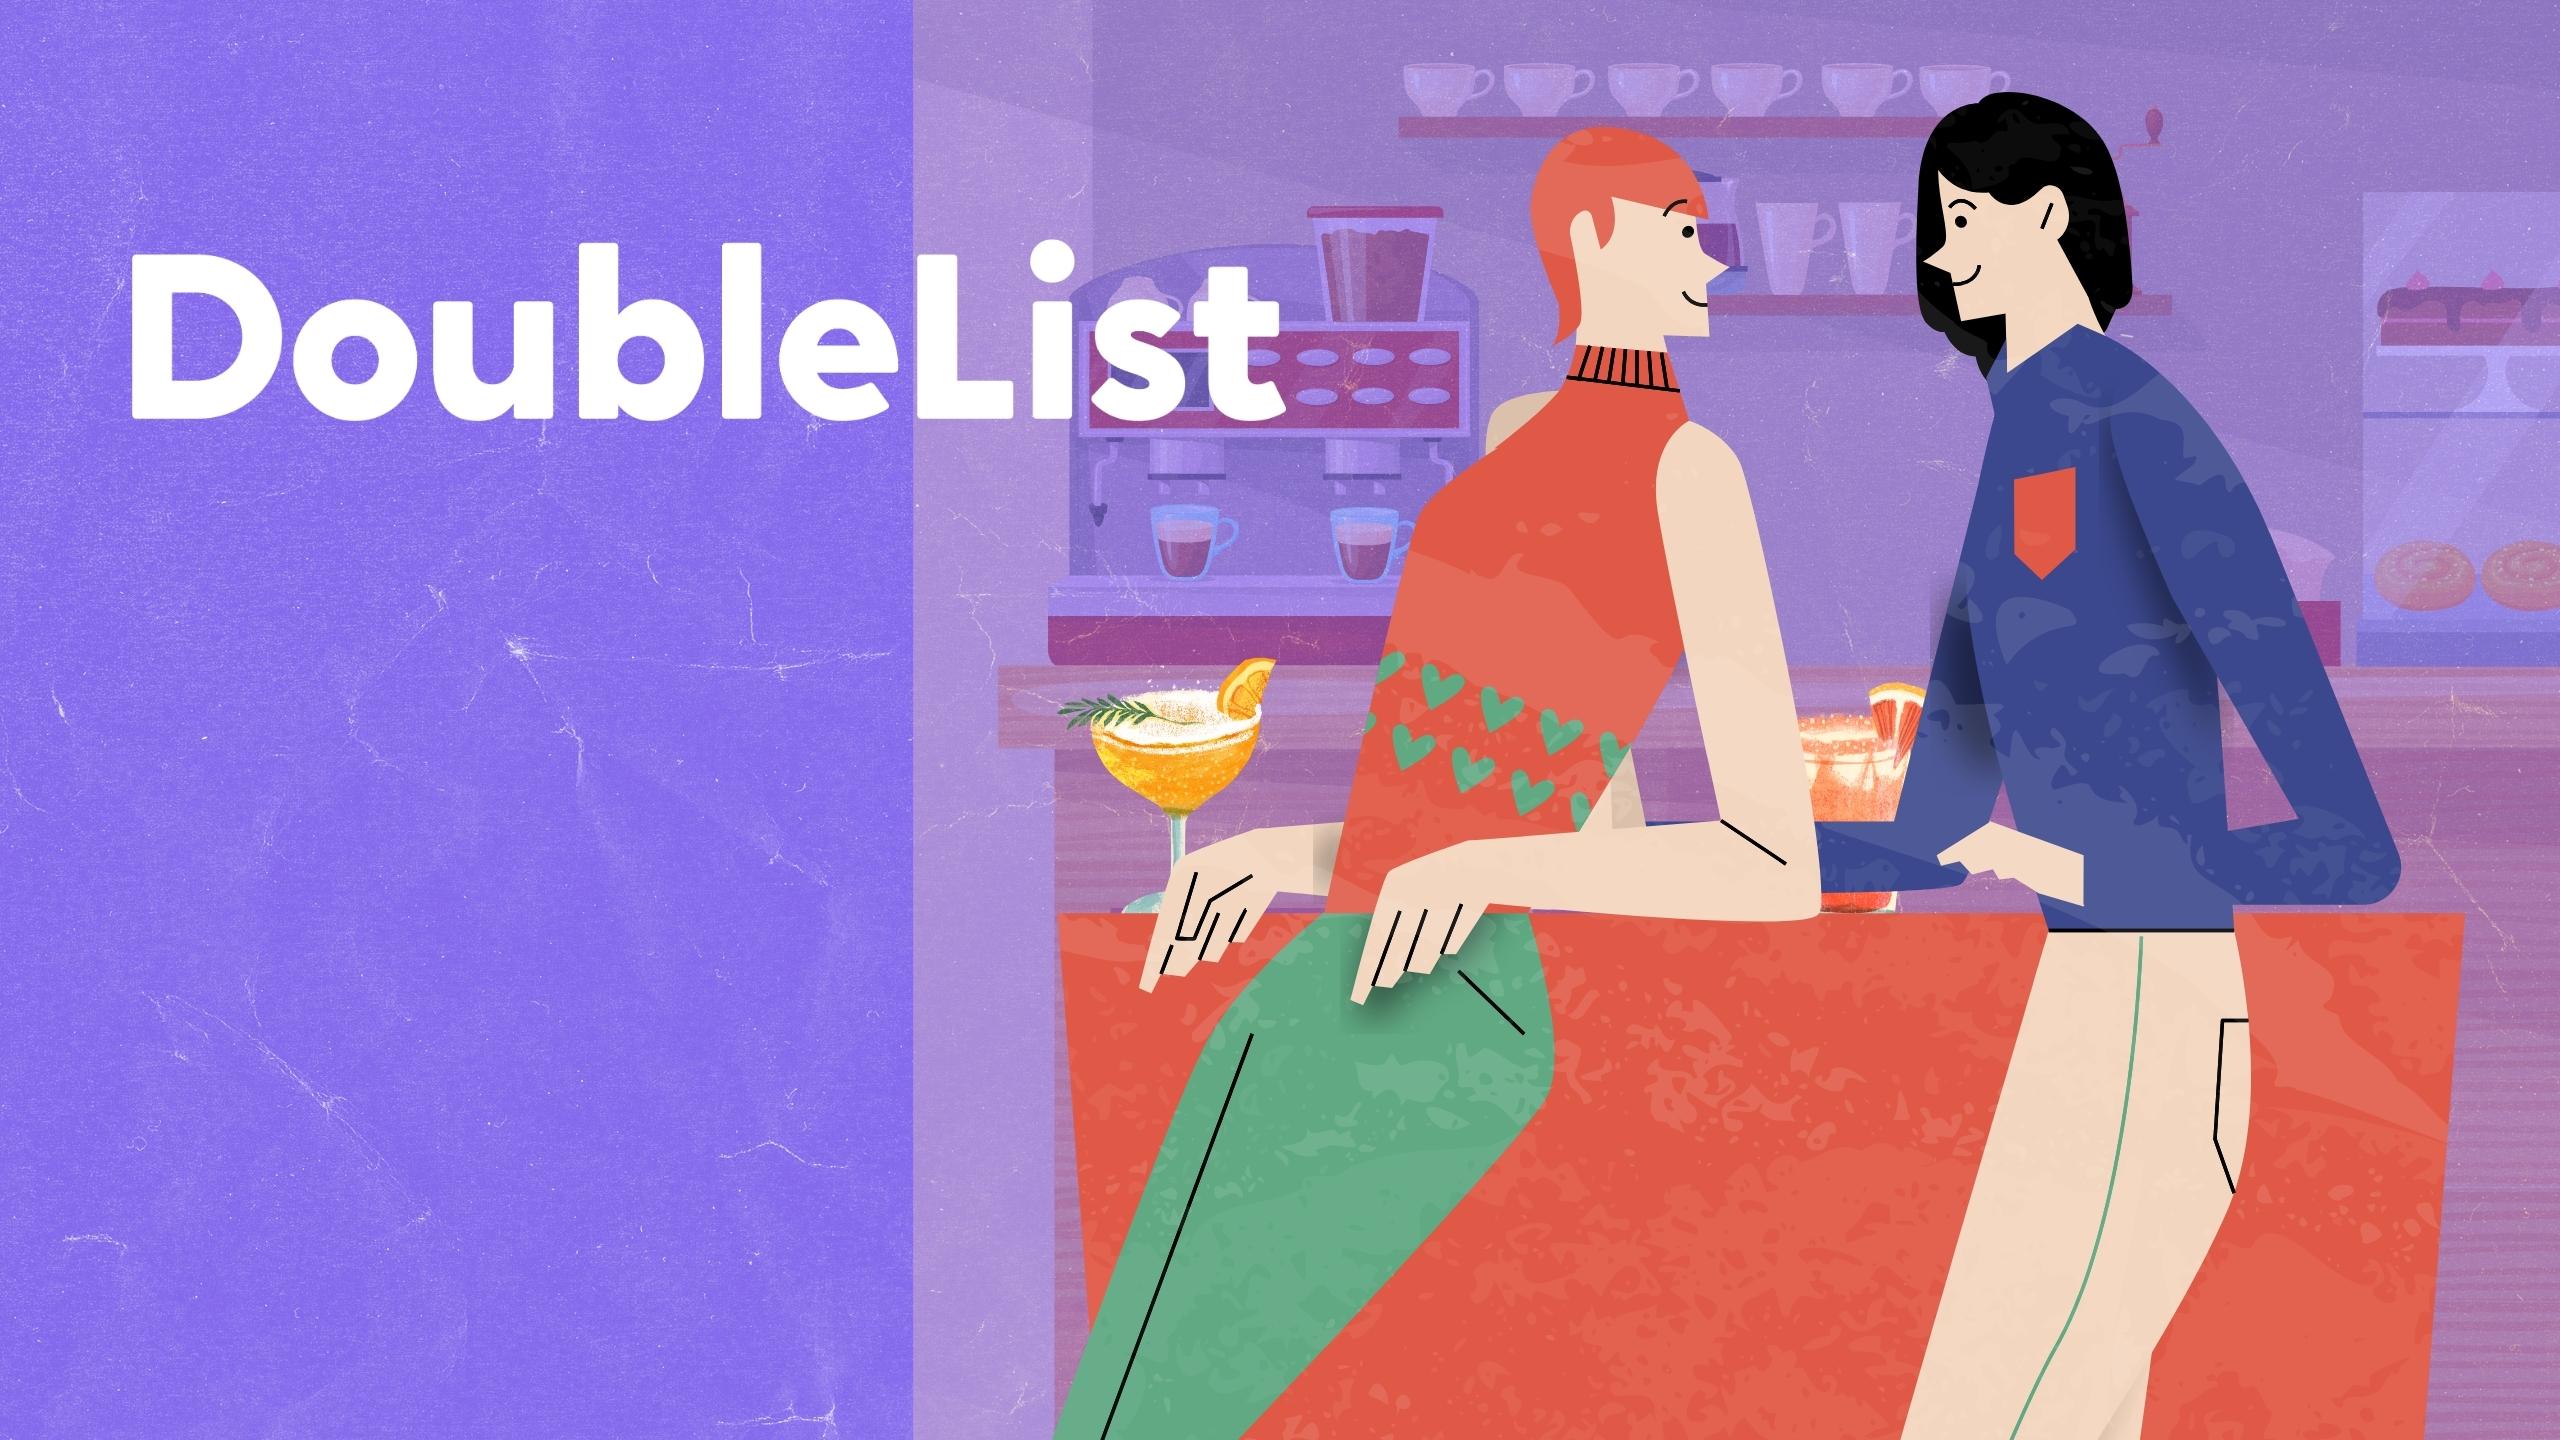 4. Doublelist - Animated dating in a bar